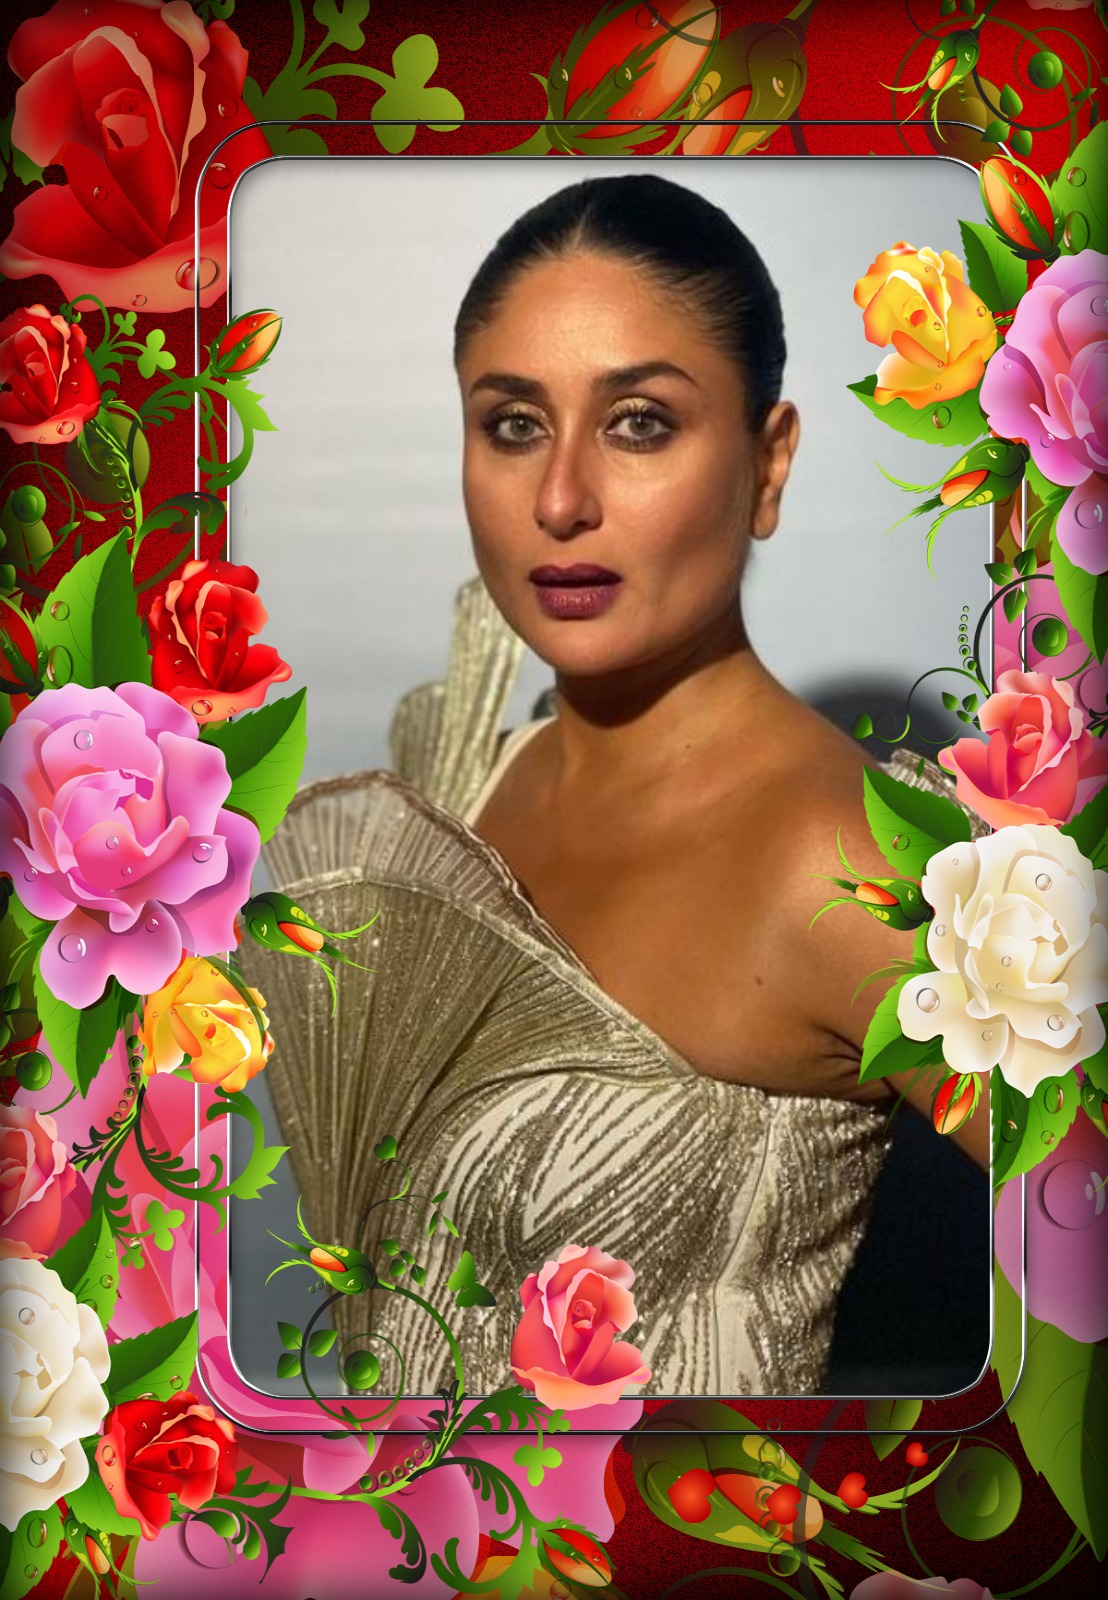 You are currently viewing ” Still Feels To Be Full Of Beans- Kareena Kapoor”